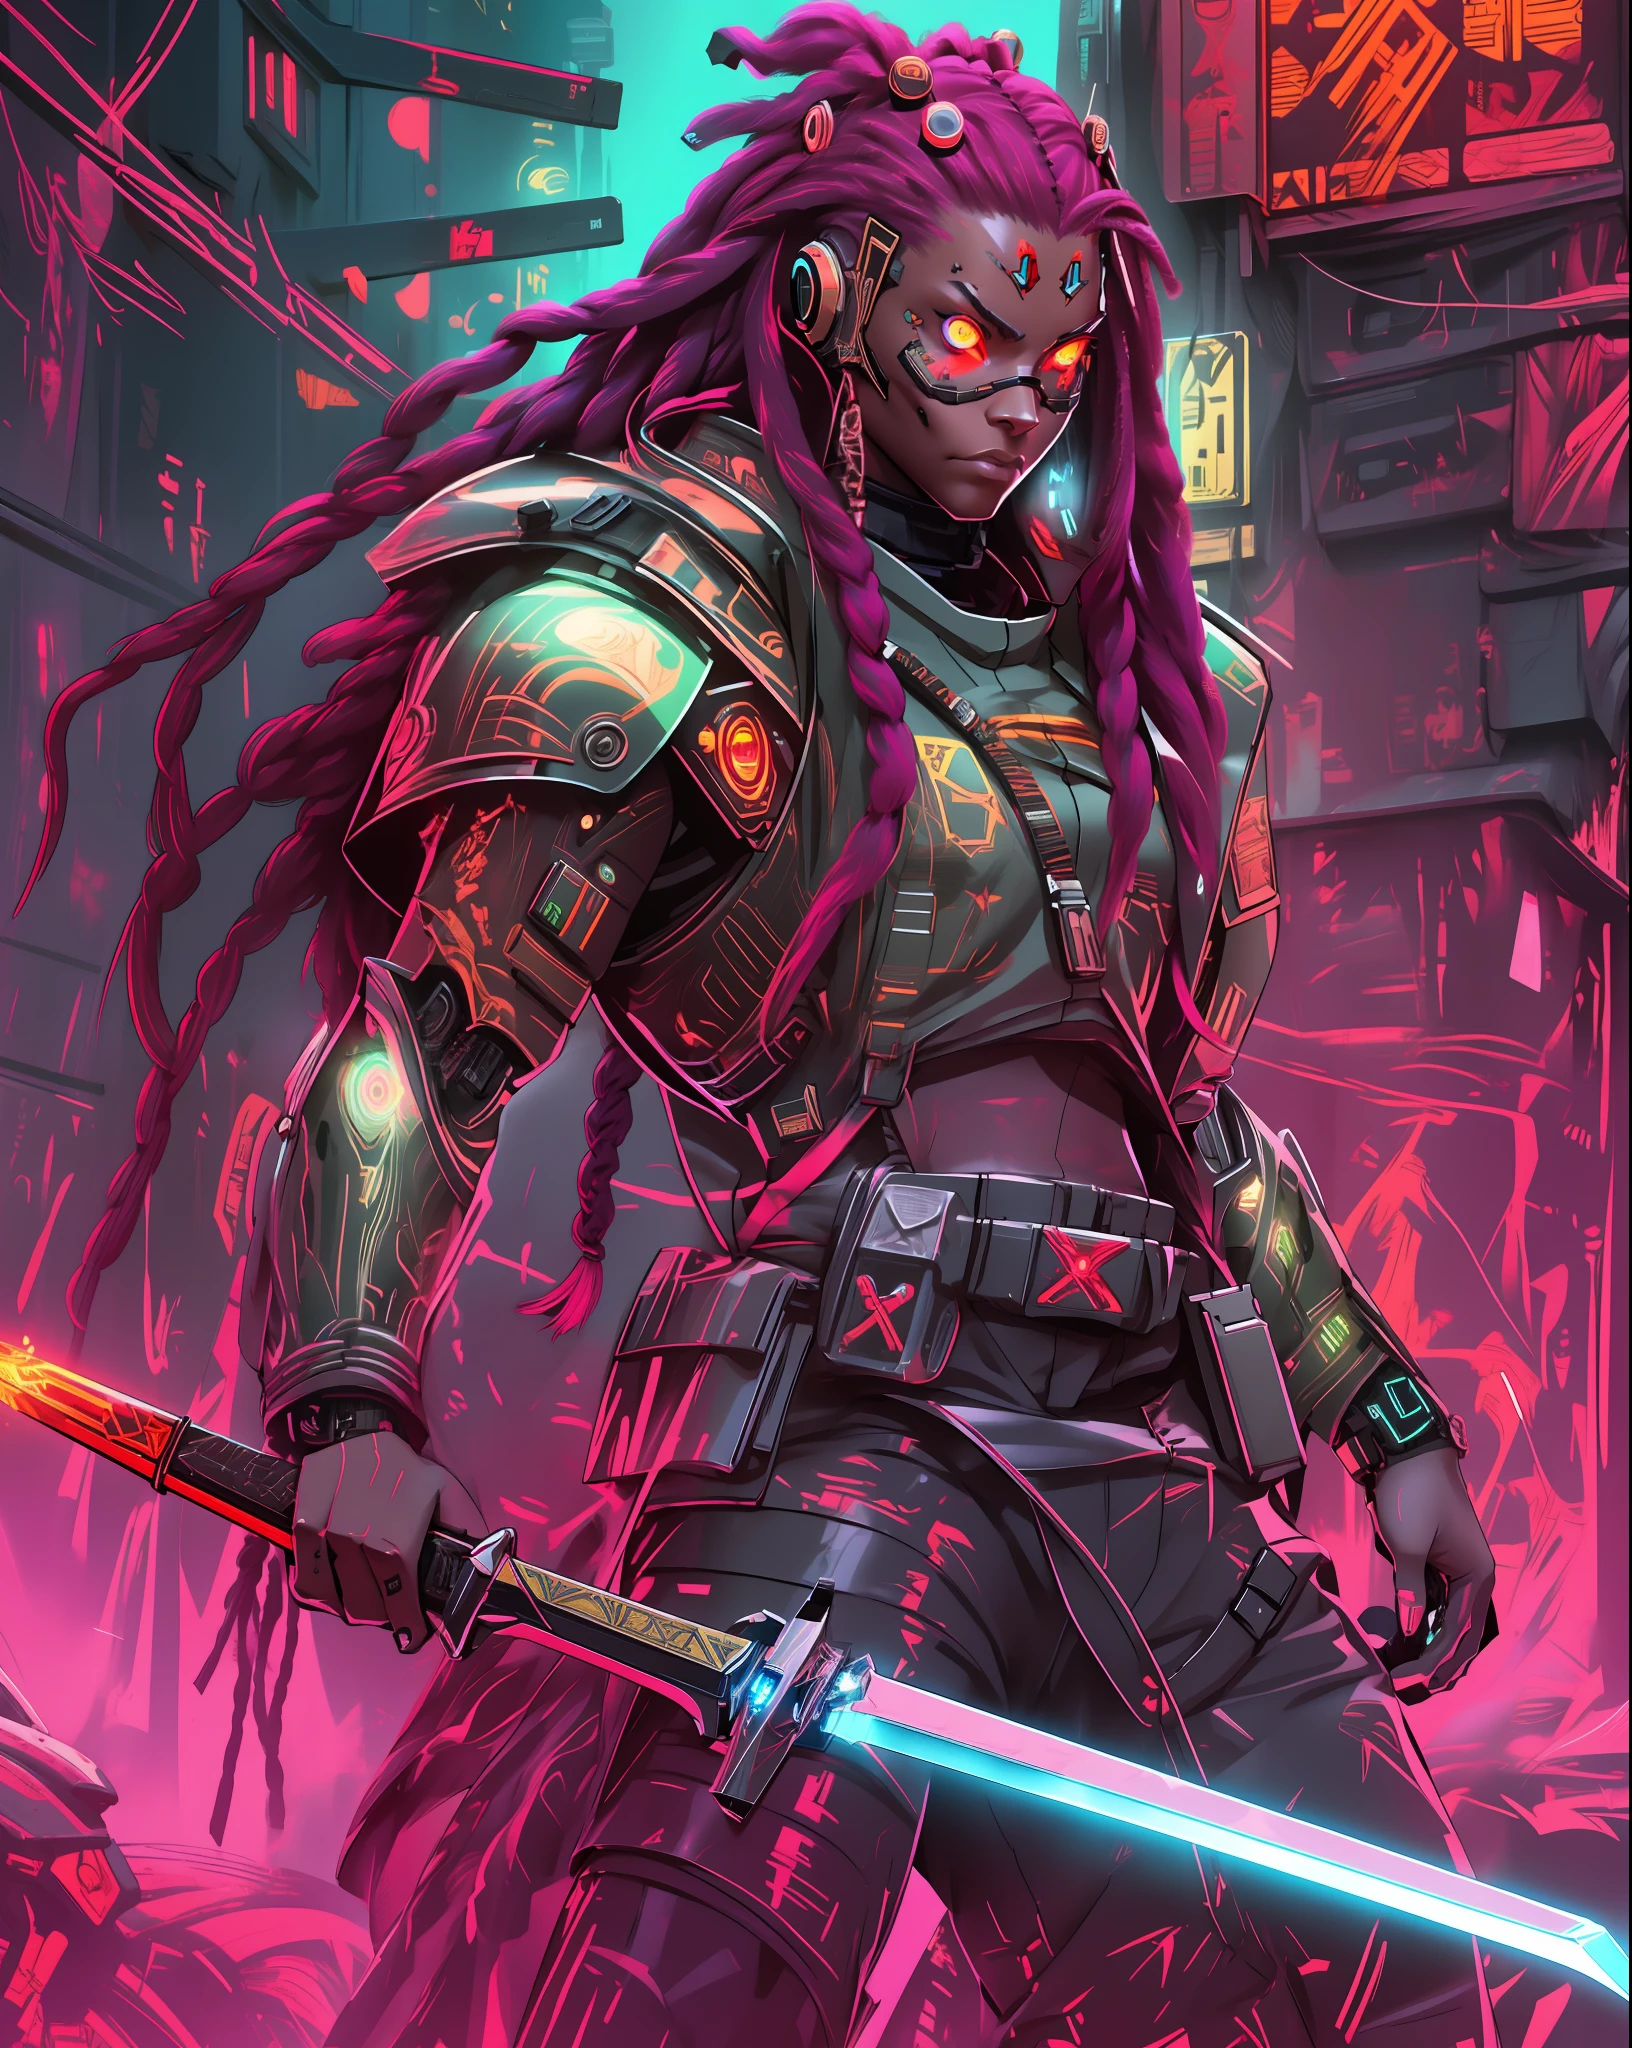 RAGE UNLEASHED, battle ready, epic, african american man cyborg soldier with dual samurai sword, red long dreadlocks, glowing neon X eyes, with shot gun on the side, heavy mecha armor, cybernetic, cyberpunk, colourful japanese stickers on armor, on planet venus, wasteland, apocalypse, baren venus planet, cinematic, volume lighting